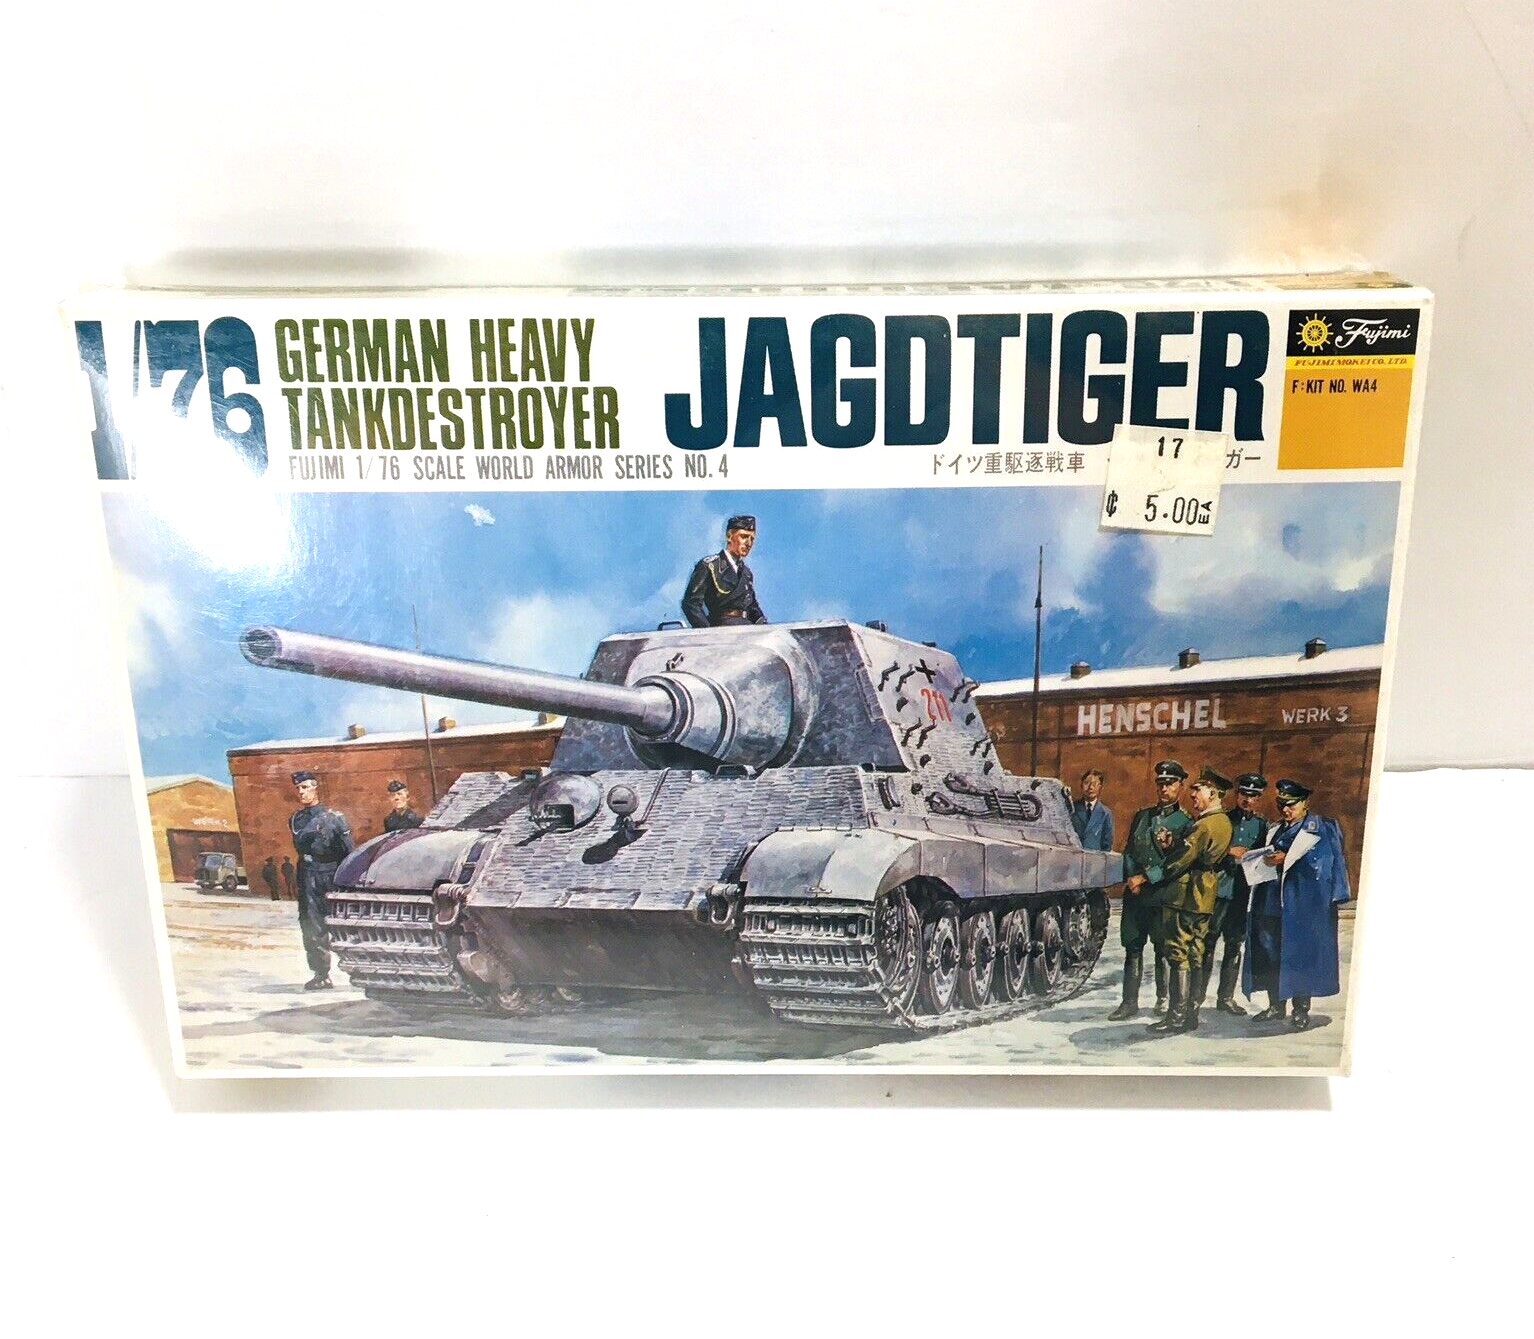 Primary image for 1/76 Fujimi JagdTiger Brand New Sealed German Heavy TankDestroyer Series No. 4